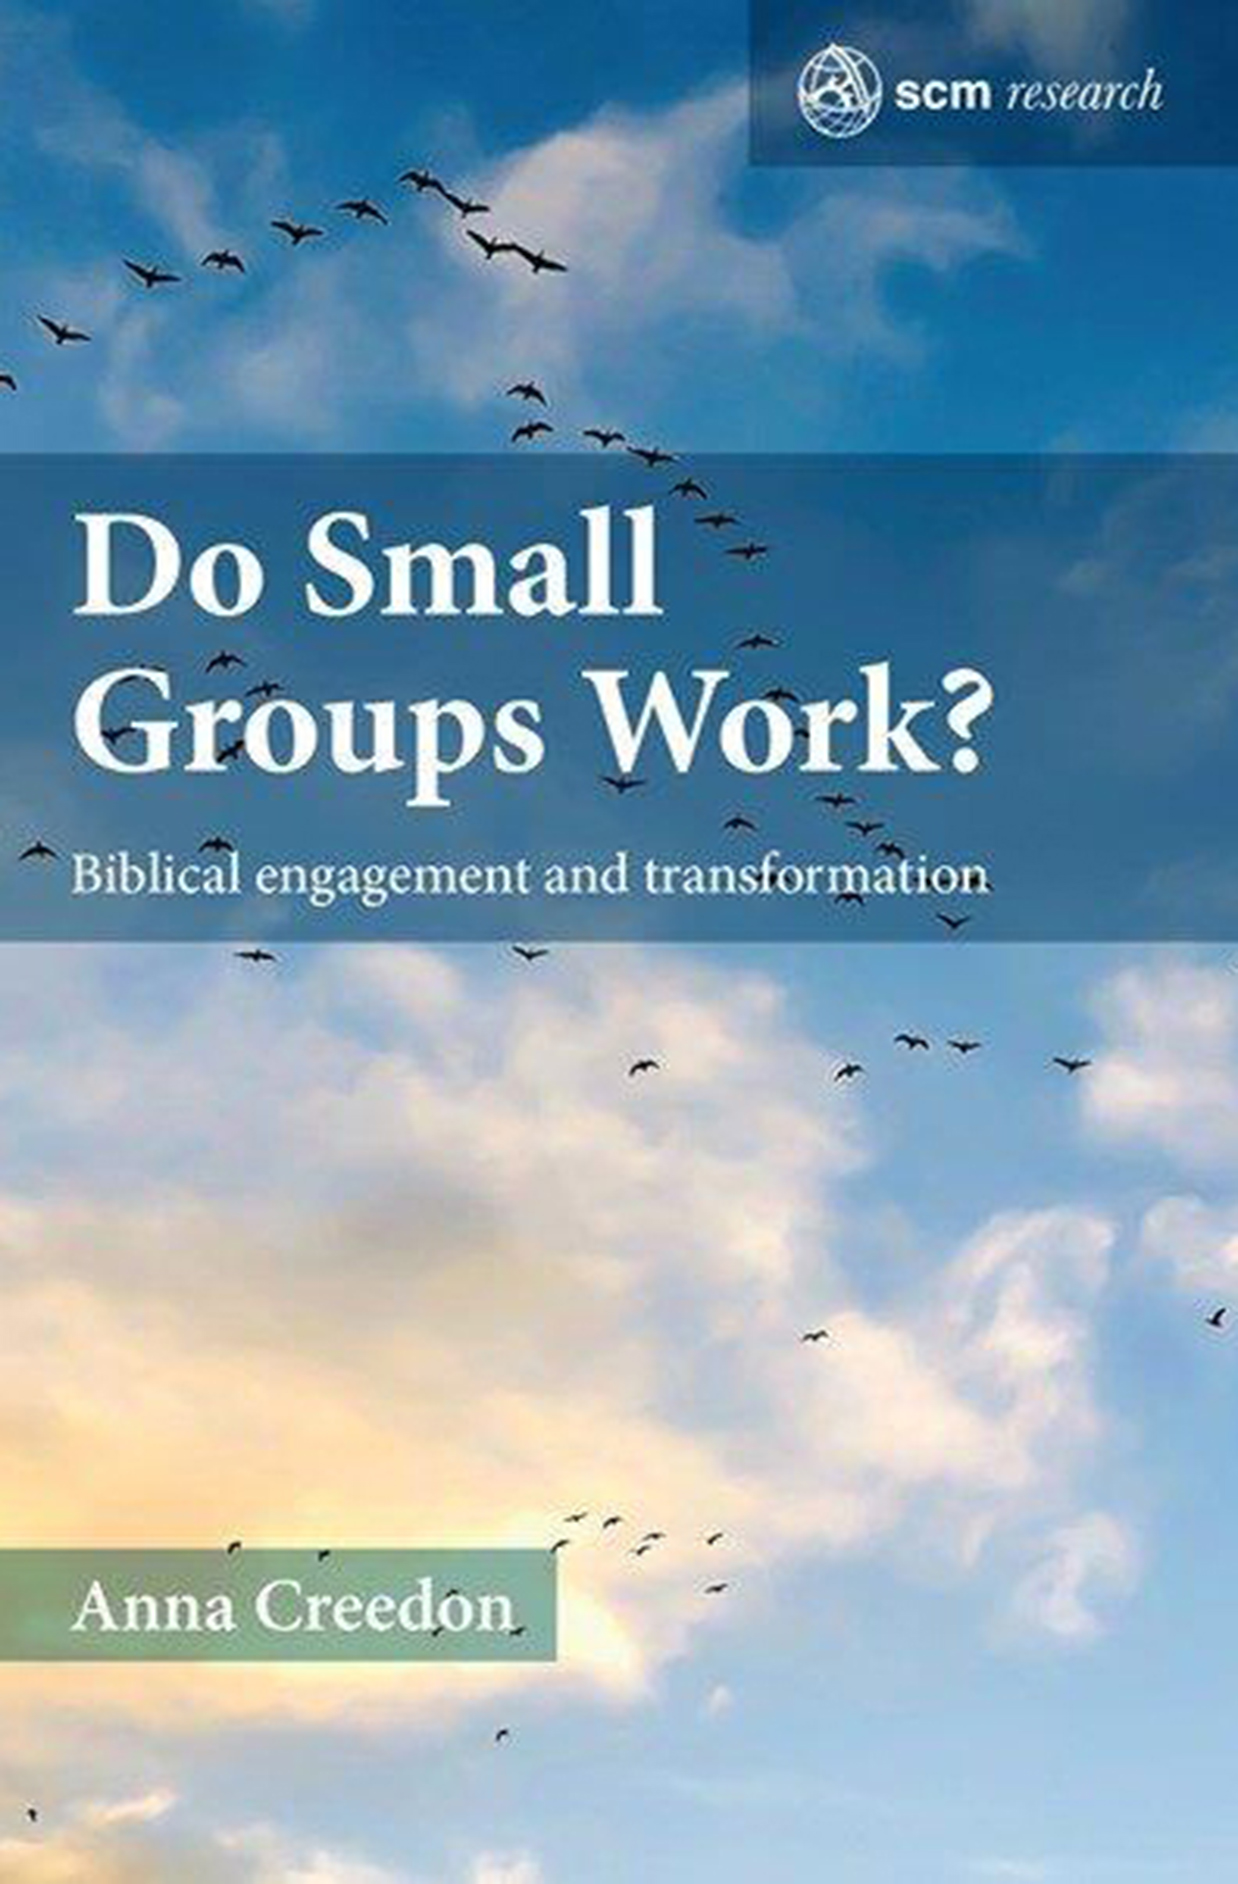 Do Small Groups Work?